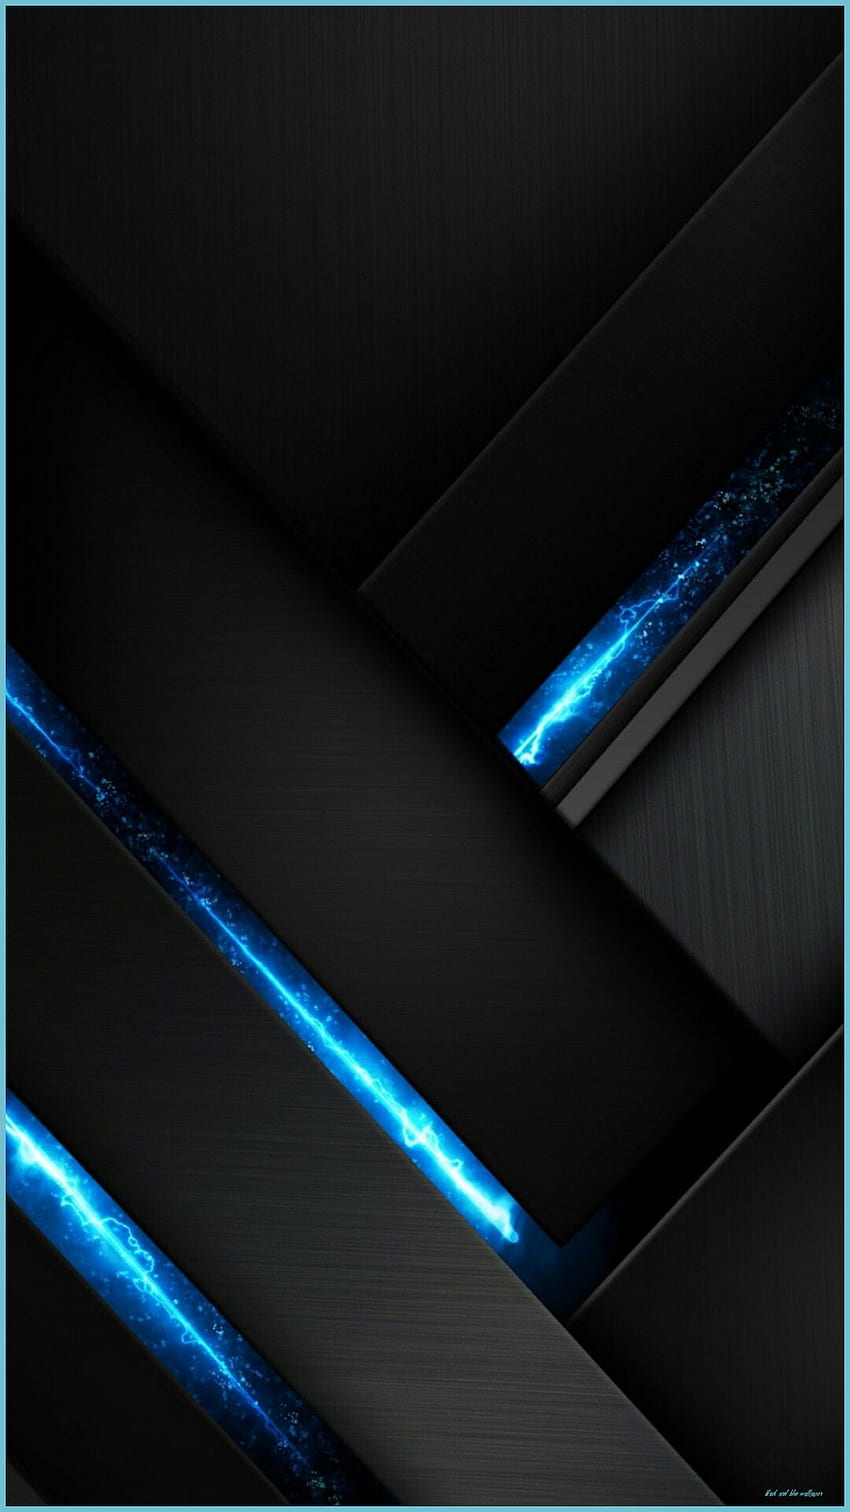 Black And Blue Phone - Top Black And Blue Phone - Black And Blue, Mobile Blue HD phone wallpaper